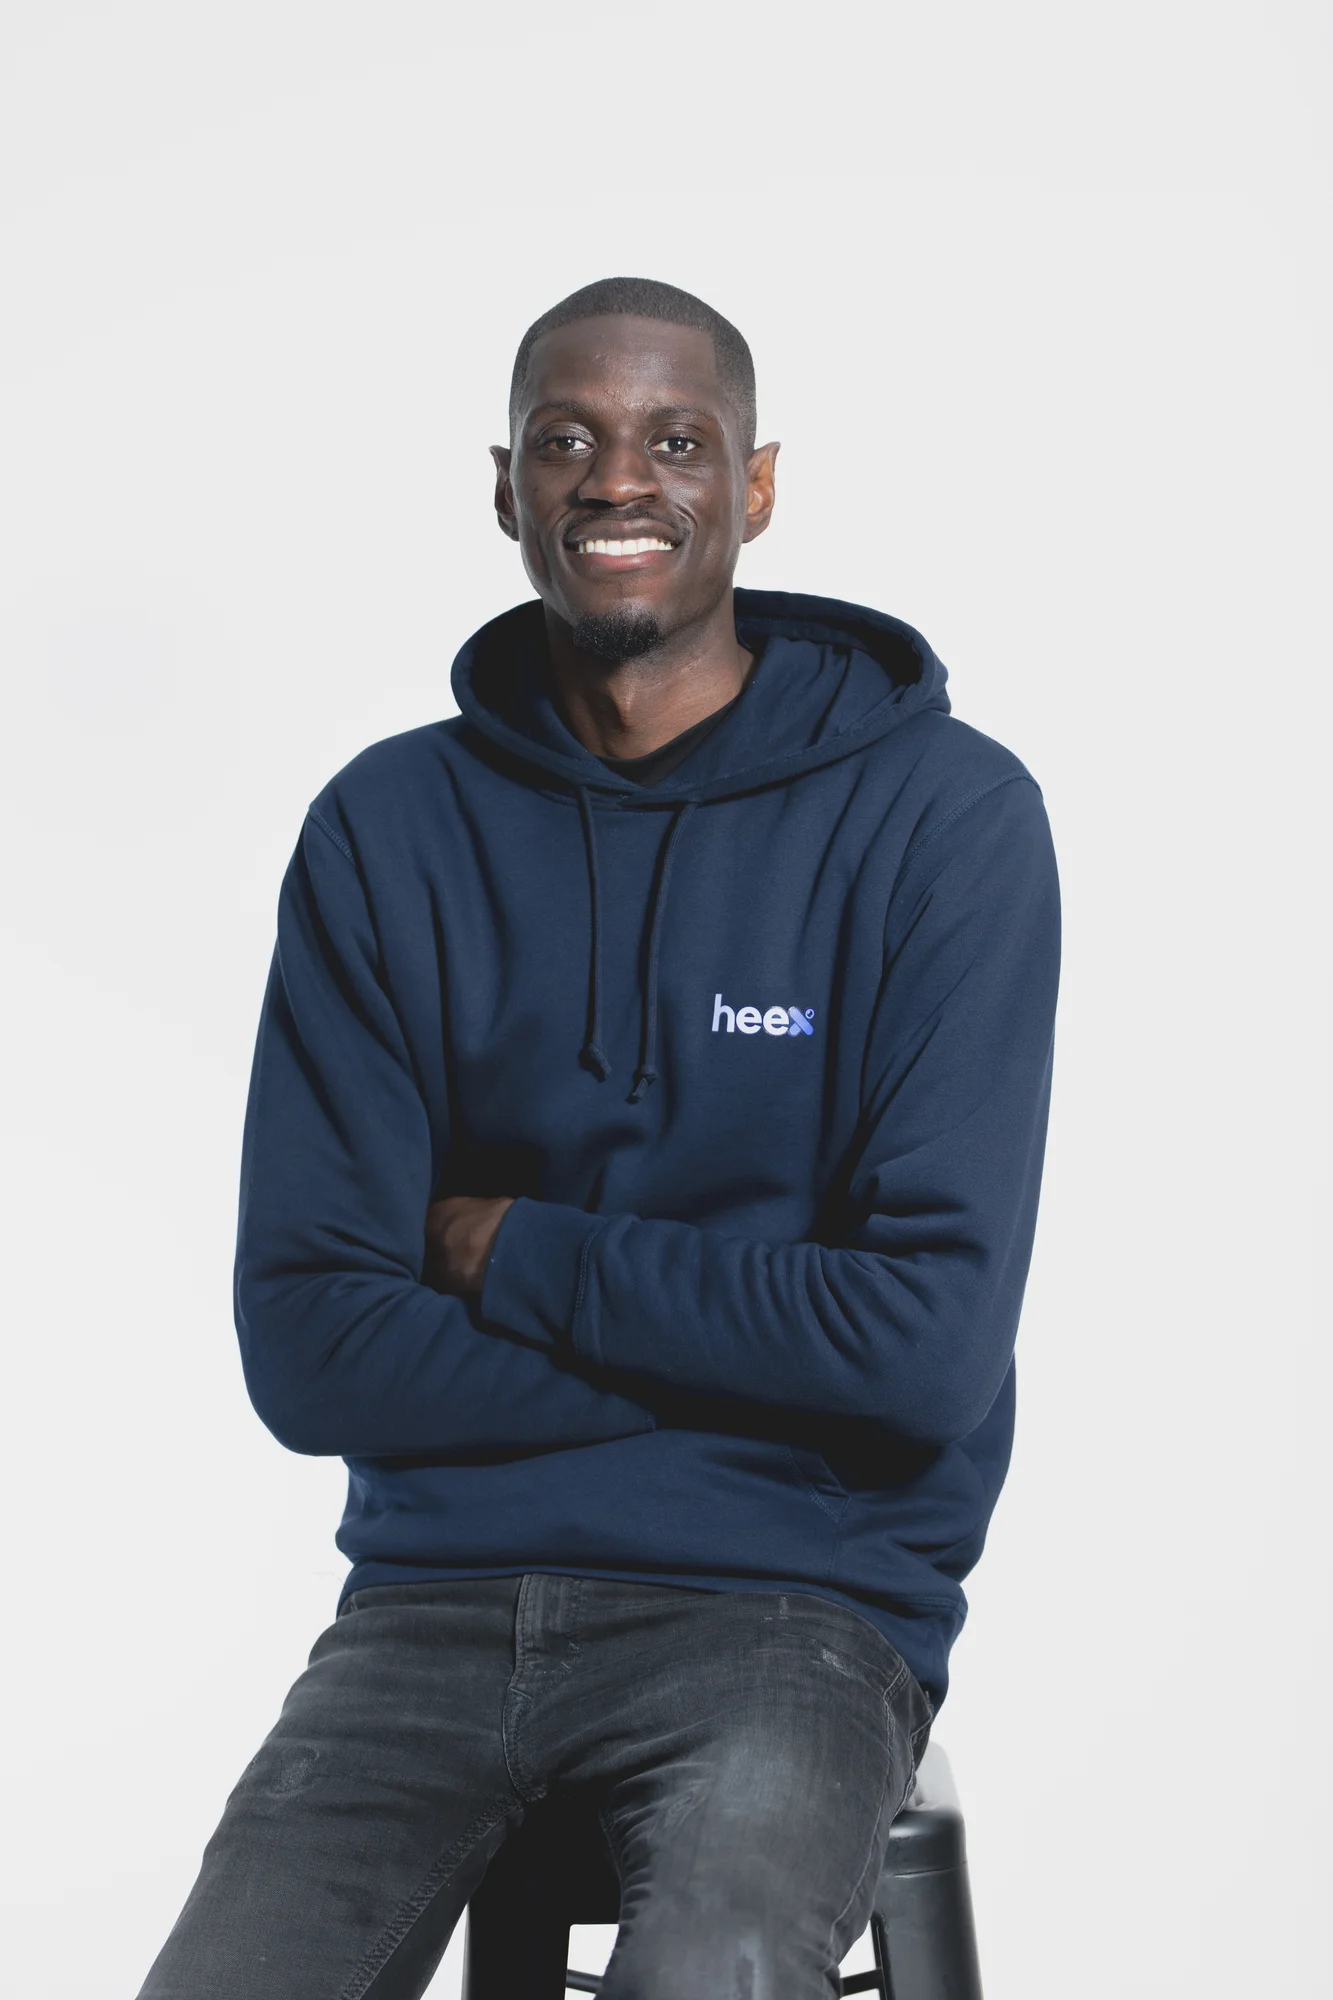 A man wearing a navy blue sweatshirt and jeans sits on a stool, looking at the camera and his arms folded across his chest.